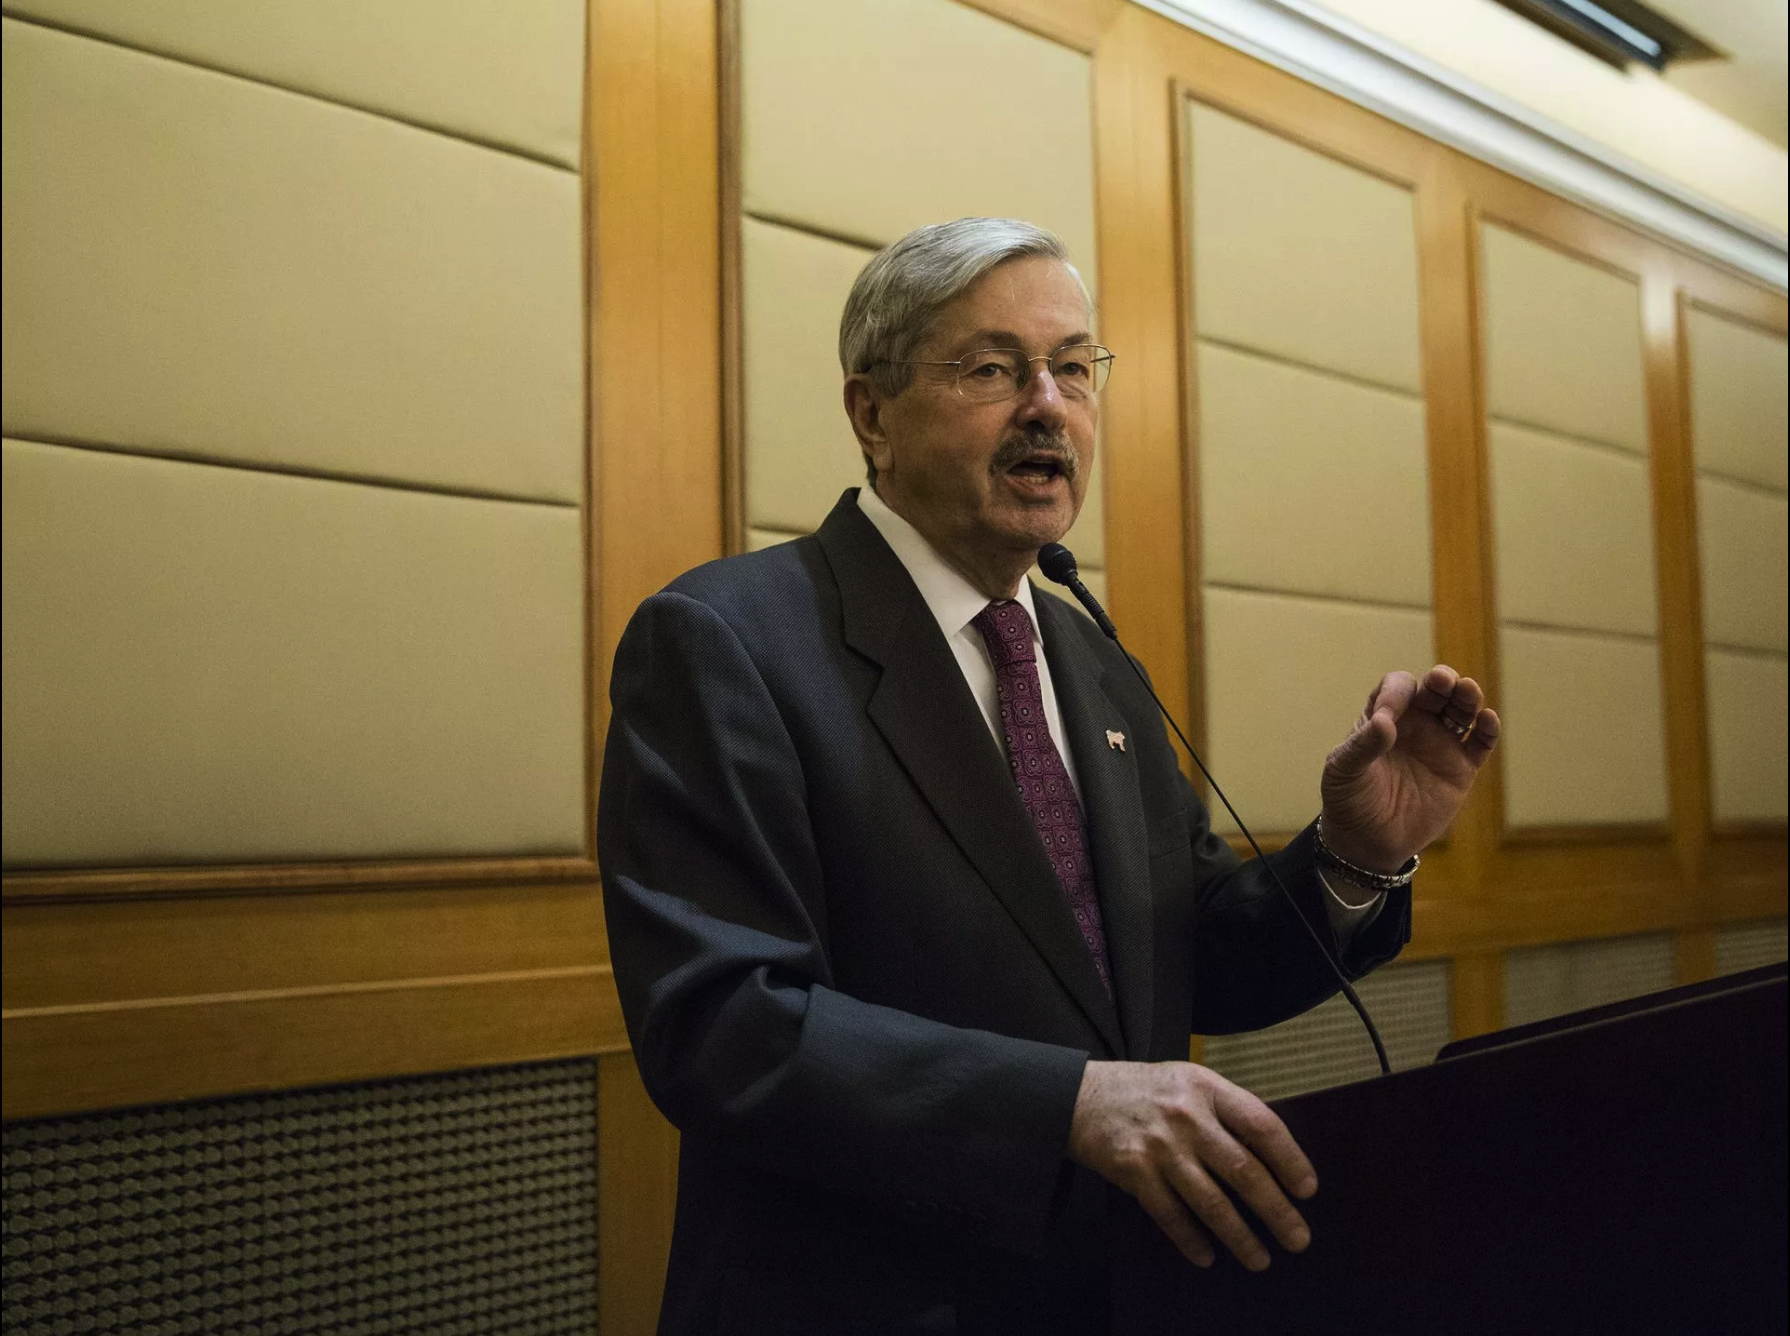 Terry Branstad, U.S. ambassador to China gives a short speech during an Iowa Sister States reception on Wednesday, Sept. 20, 2017, in Beijing, China. Image by Kelsey Kremer. China, 2017.
